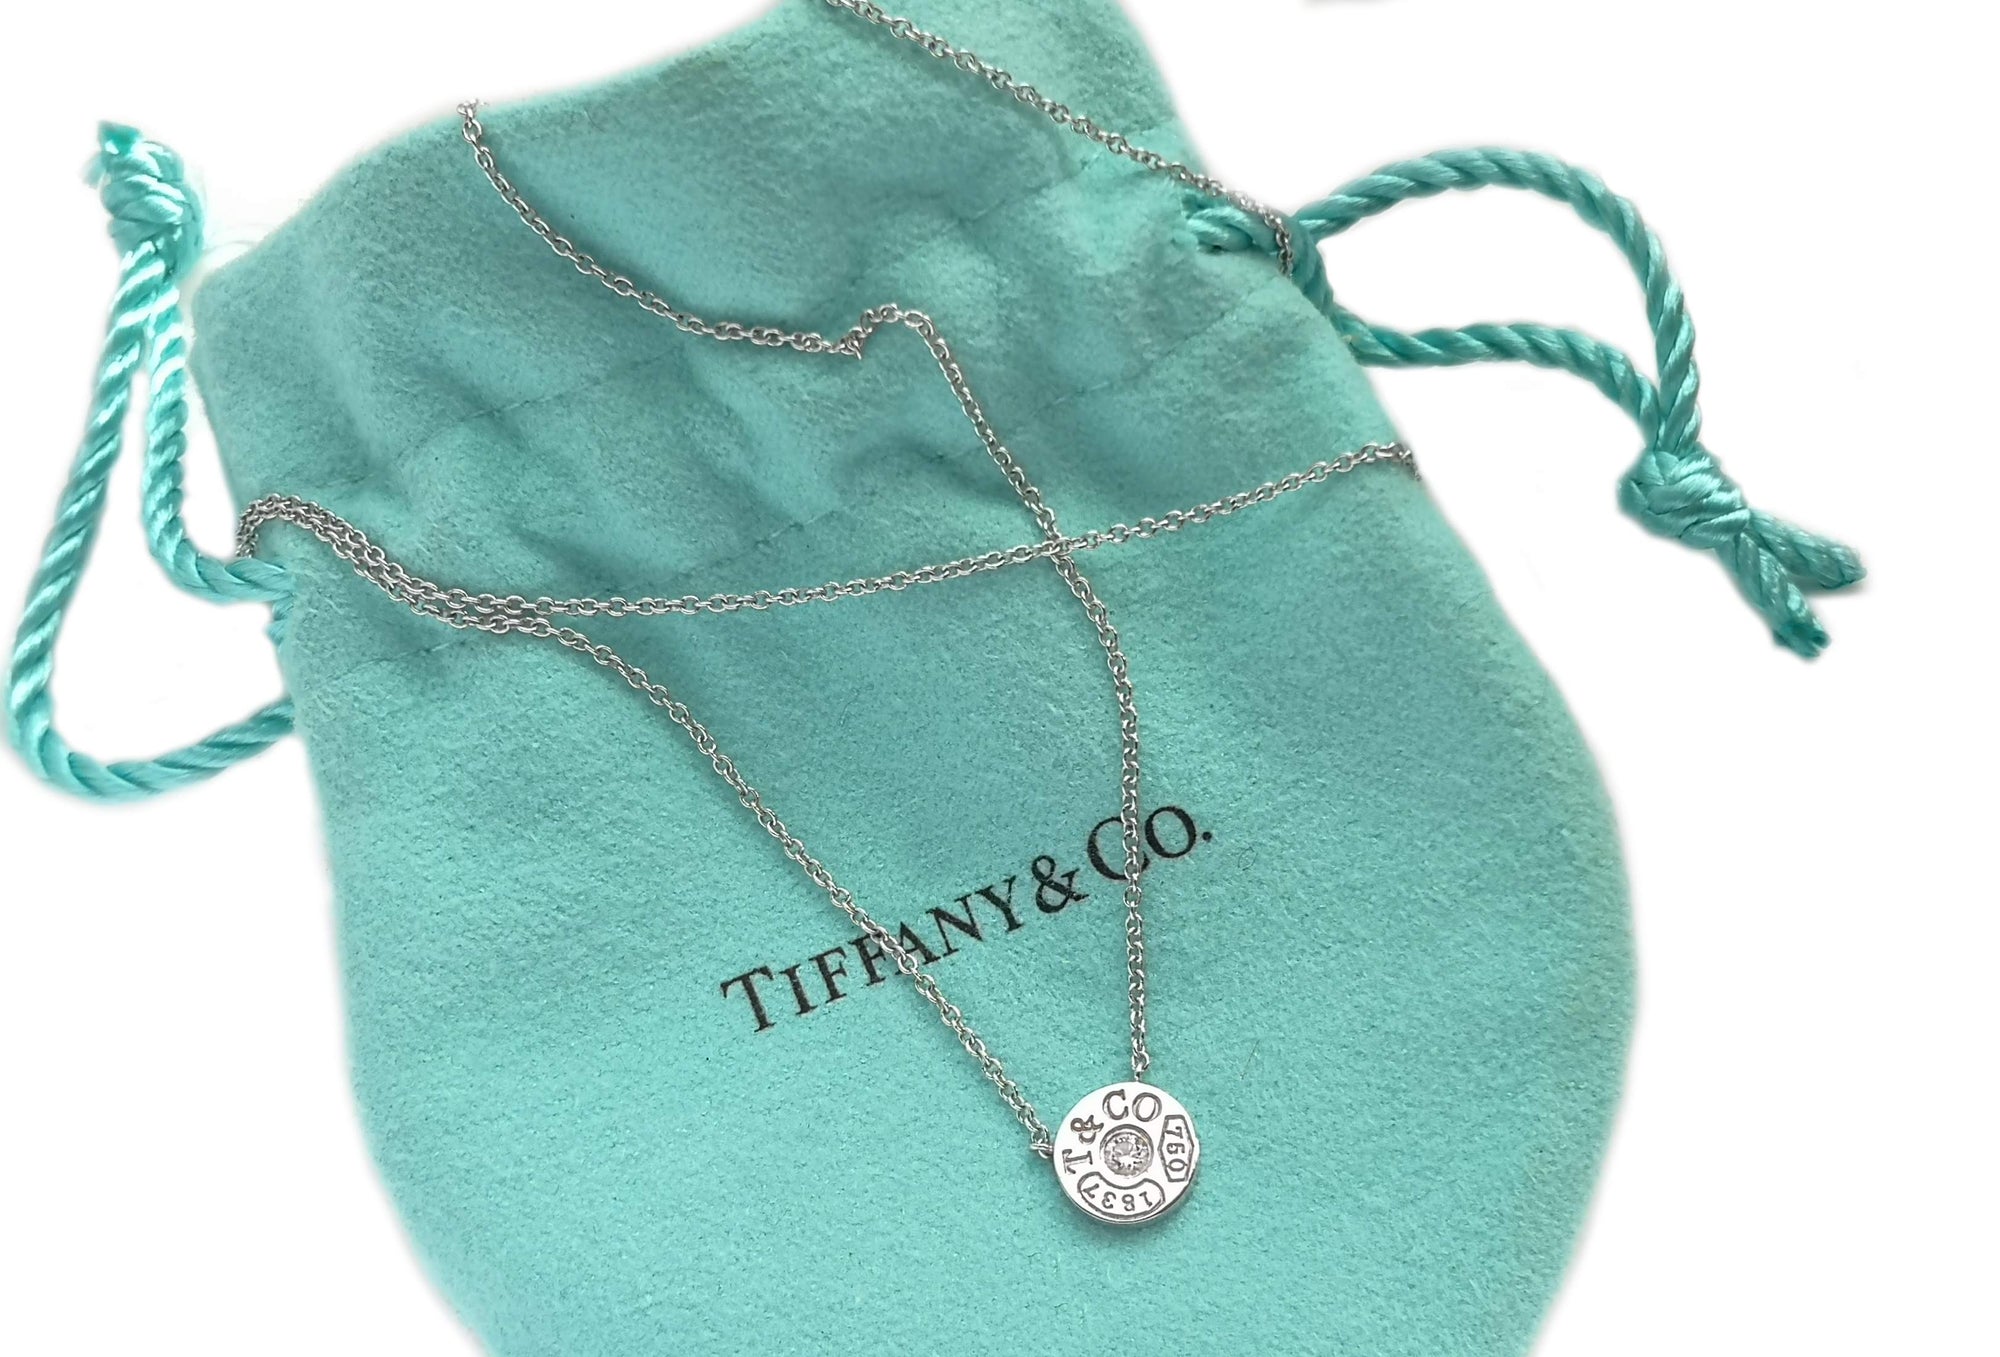 Tiffany & Co. 1837 Circle Pendant with Diamond in 18k White Gold